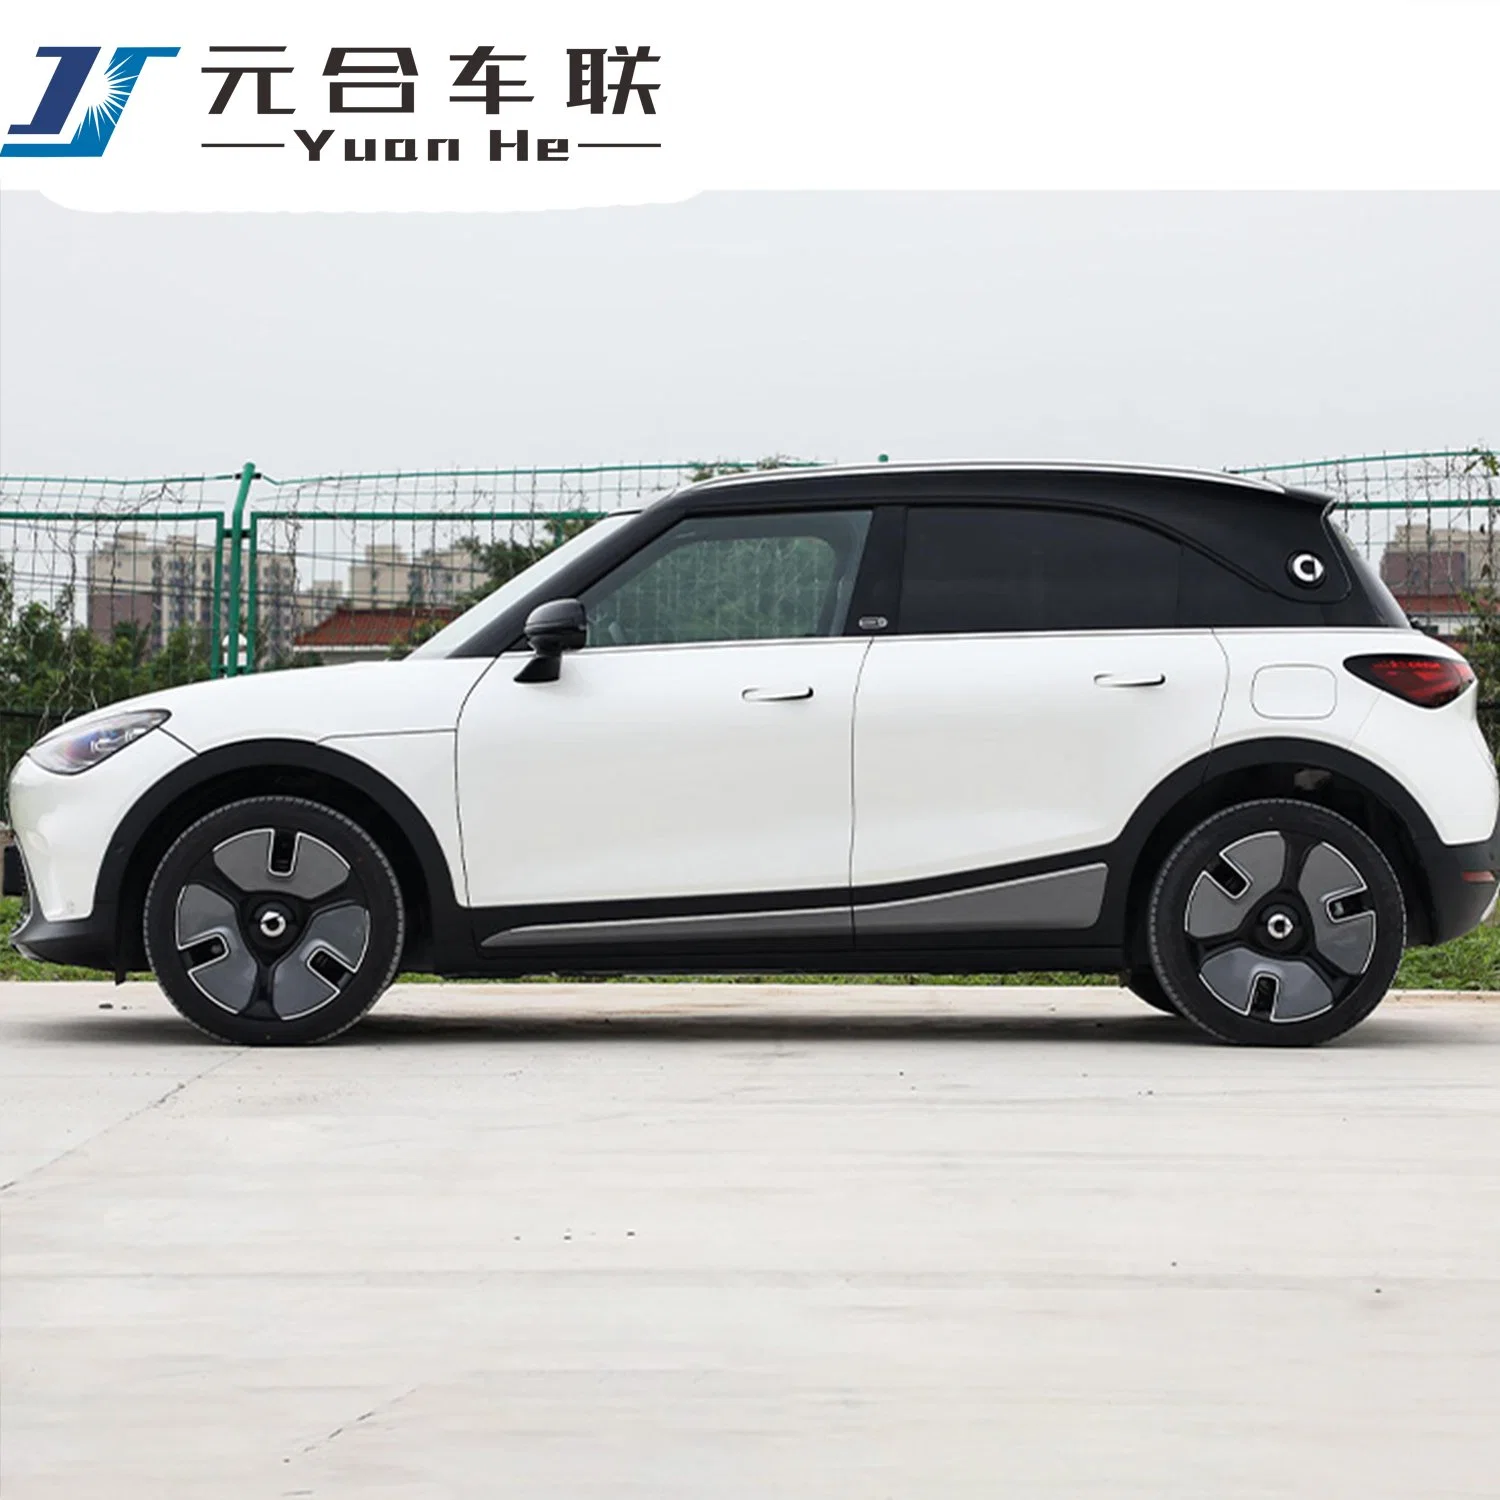 Hot Sale High Speed Mercedes-Benz Smart Elf #1 2023 PRO Small SUV Electric Car